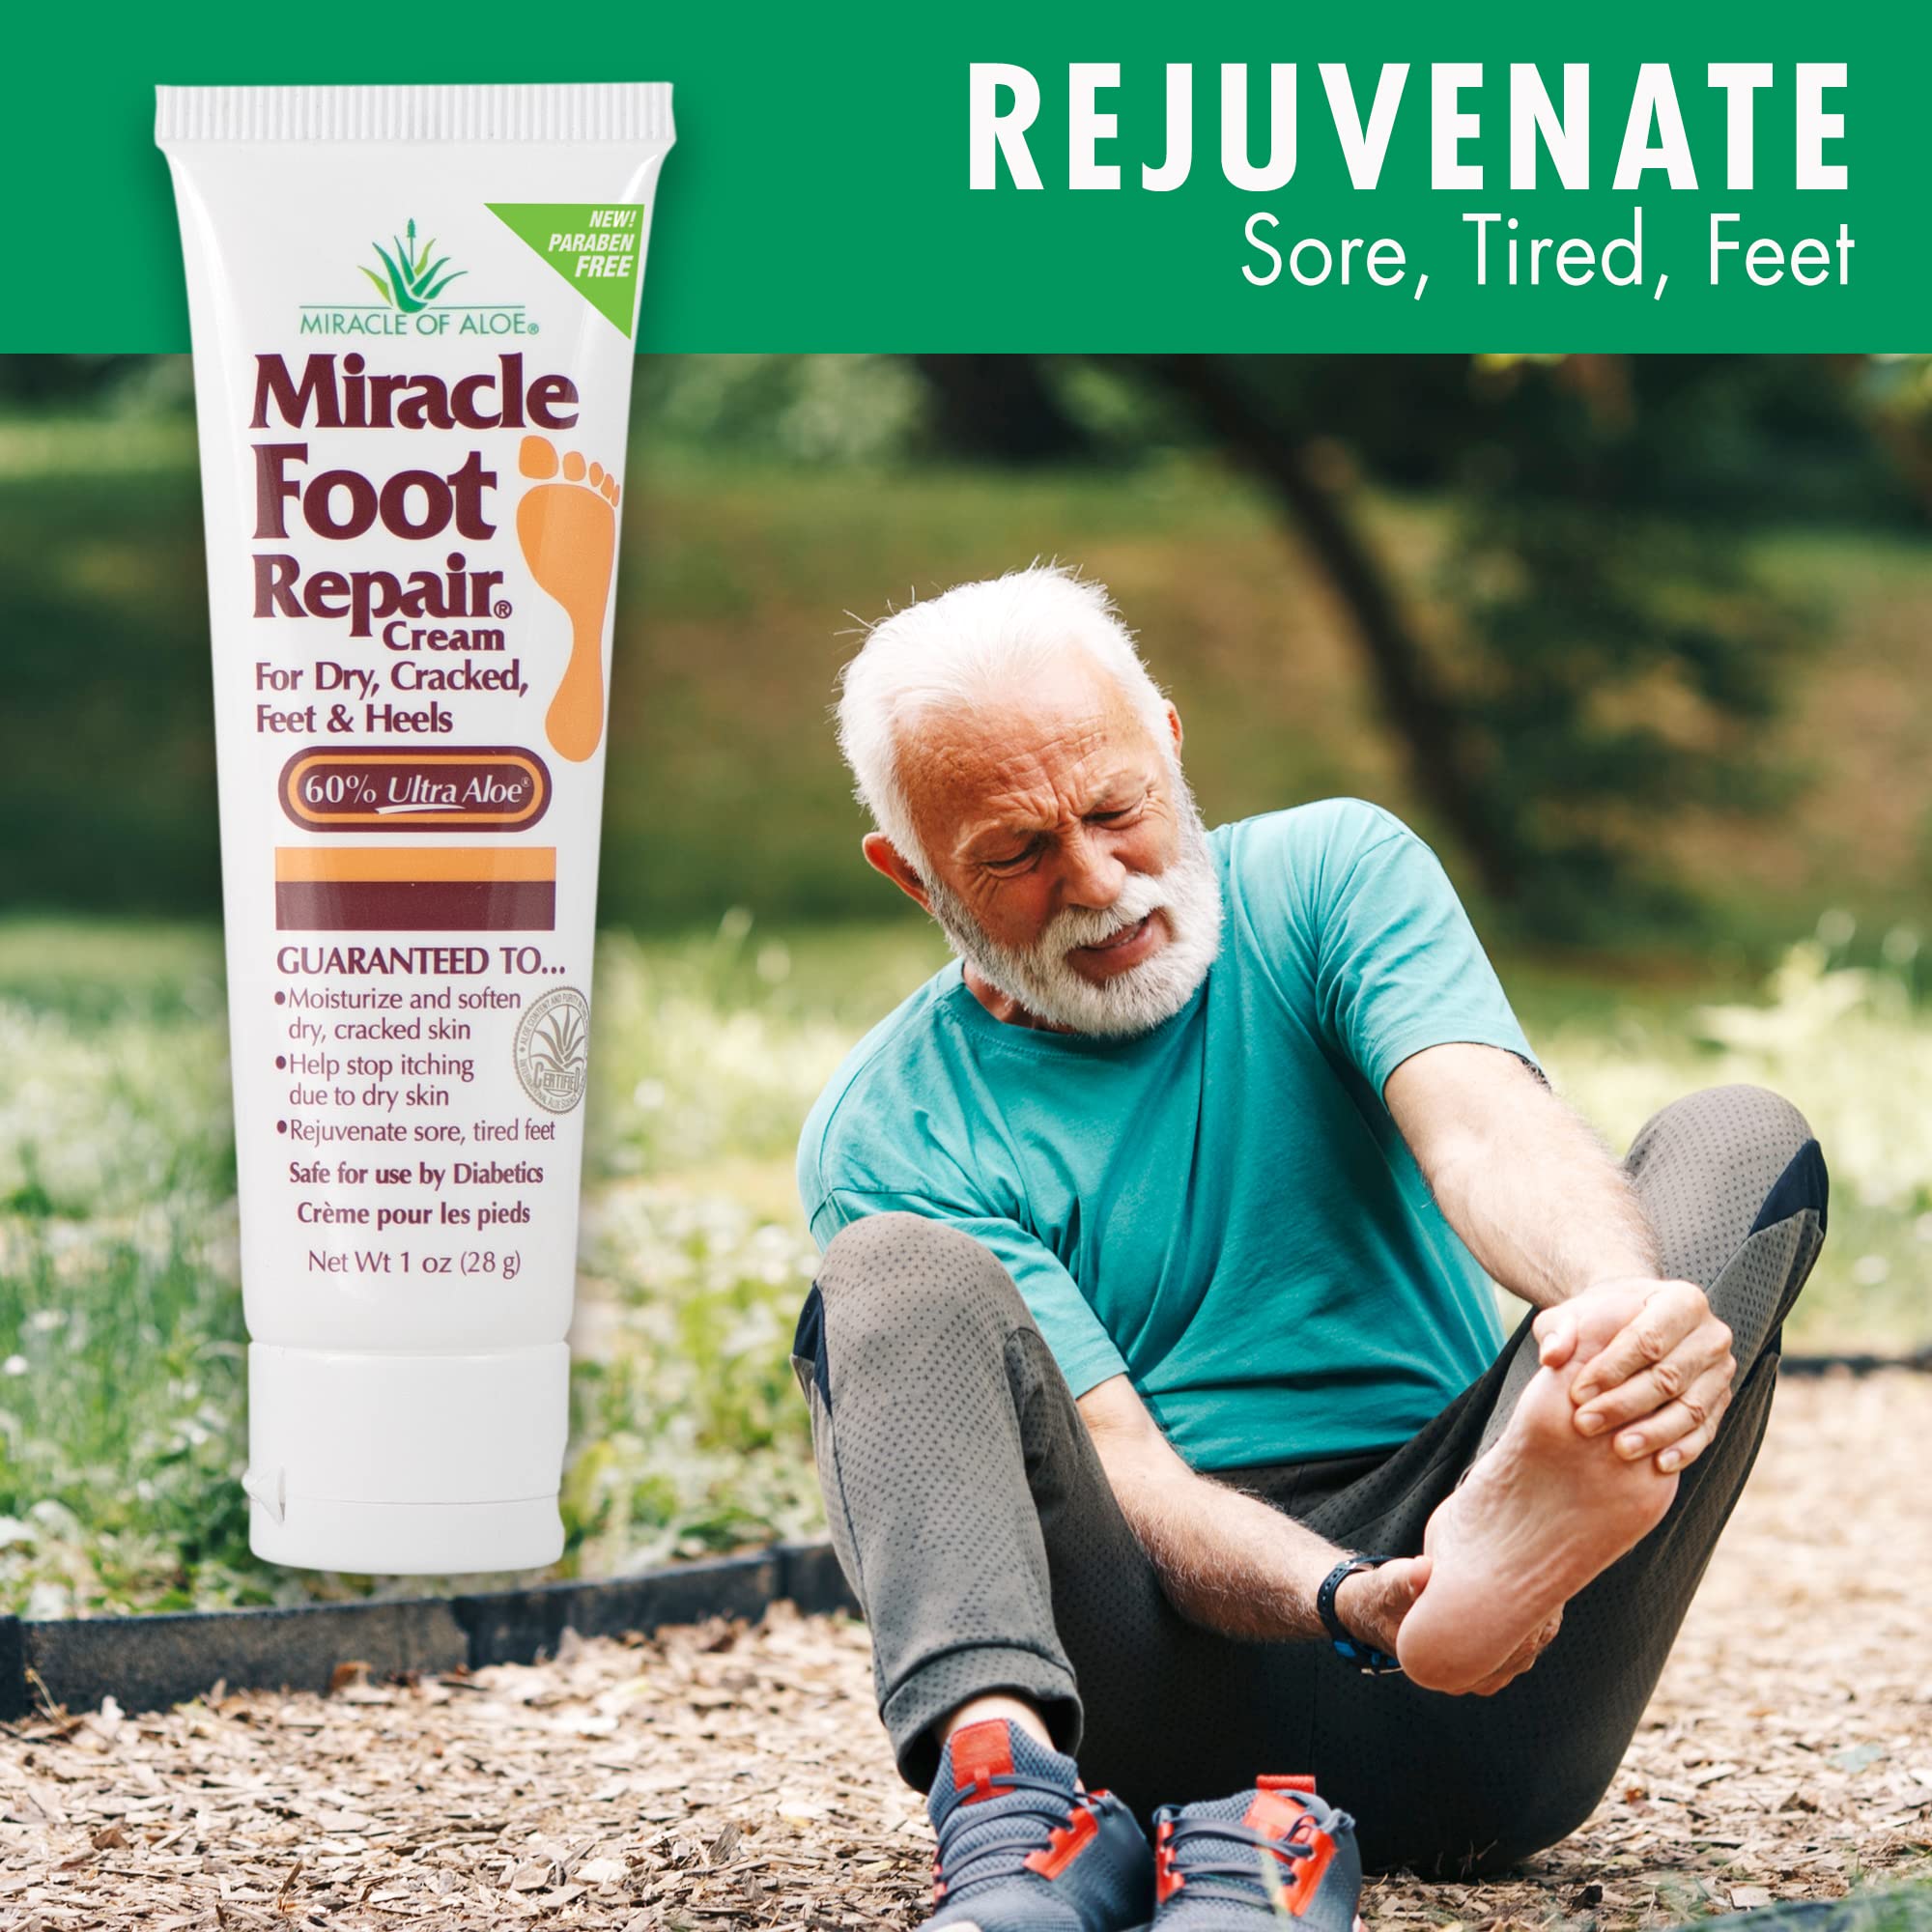 Miracle Foot Repair Cream | 1 Ounce Tube (3) | Fast Relief for Dry, Cracked, Itchy Feet and Heels | Moisturizes | Softens | Restores Comfort | Stops Nasty Odor | Diabetic-Safe